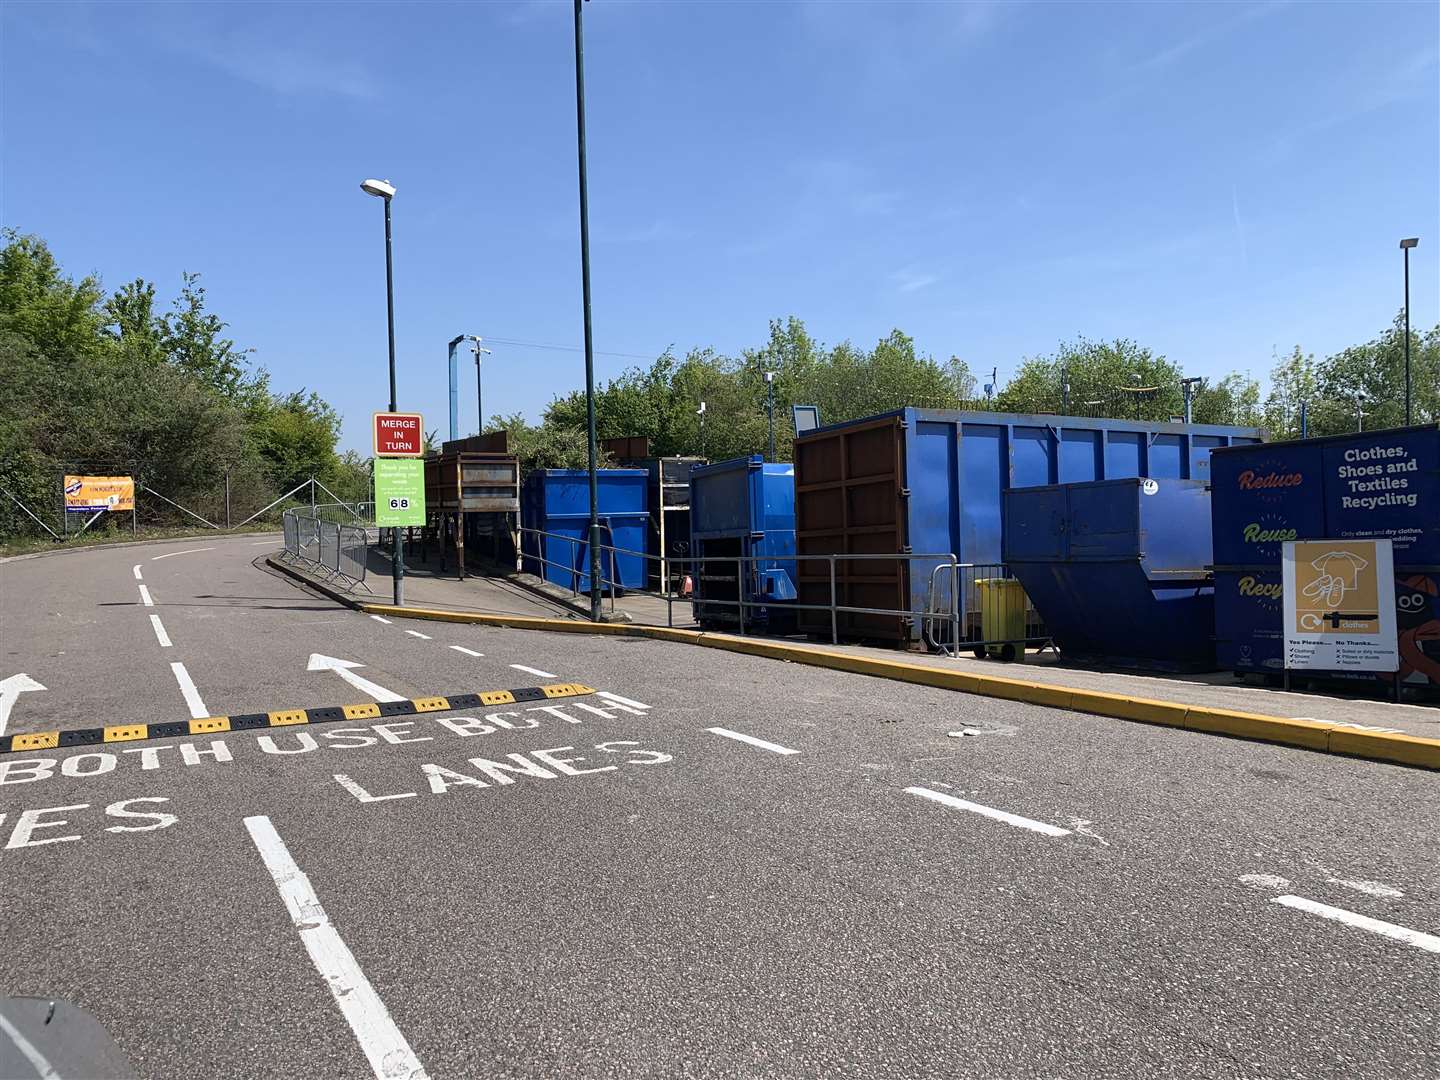 The recycling centre in Cuxton is one of three run by Medway Council